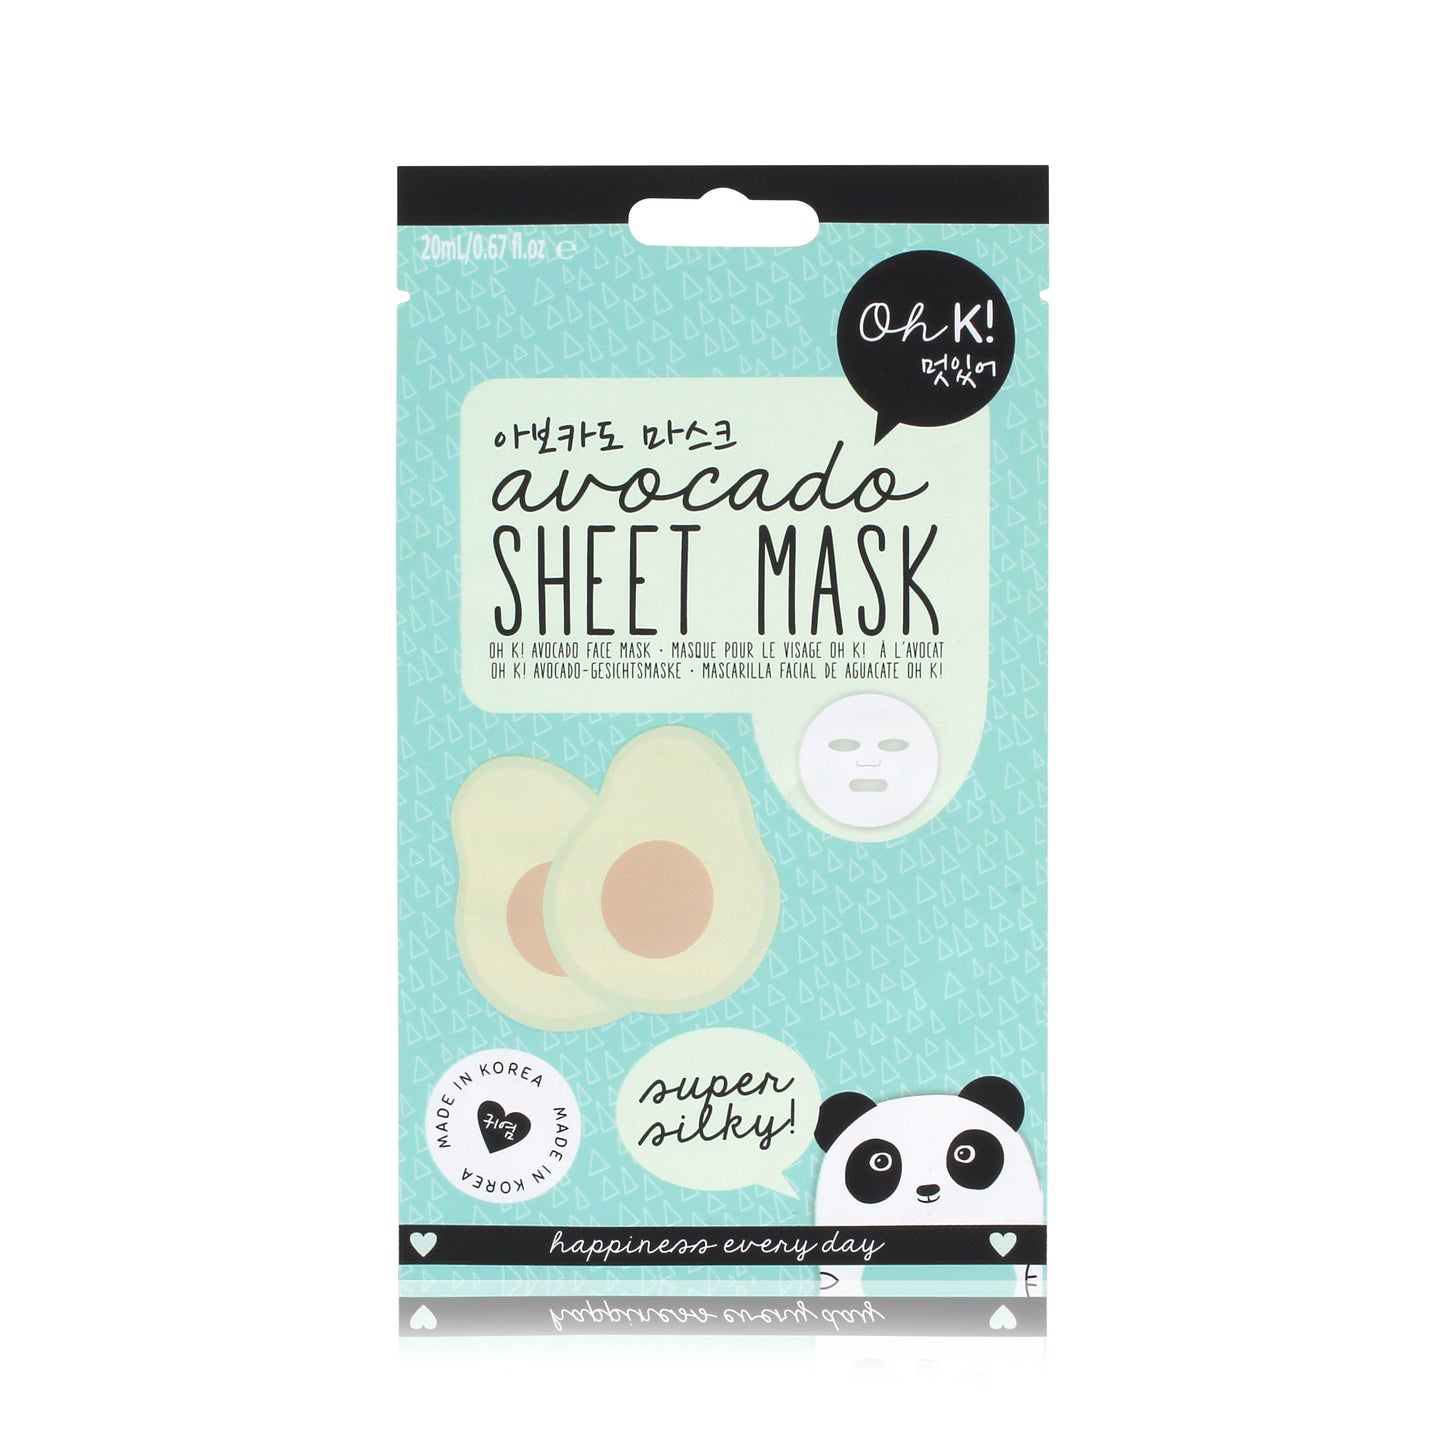 Load image into Gallery viewer, Oh K! Sheet Mask - Avocado
